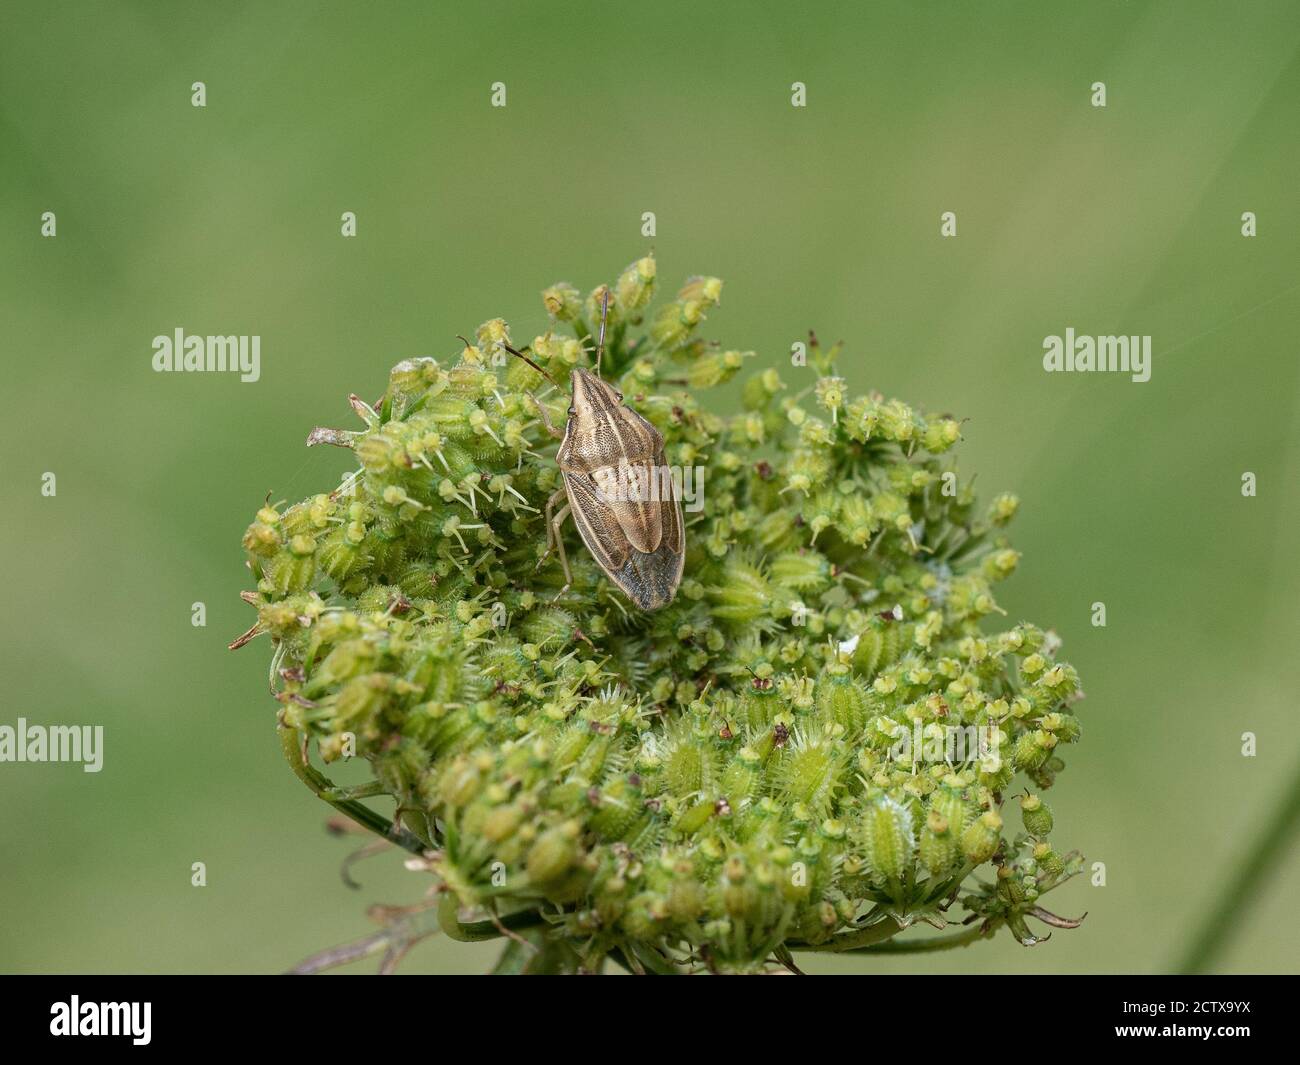 A close up of a Bishops Mitre Shield bug (Aelia acuminata) resting on a seed head of wild carrot Stock Photo